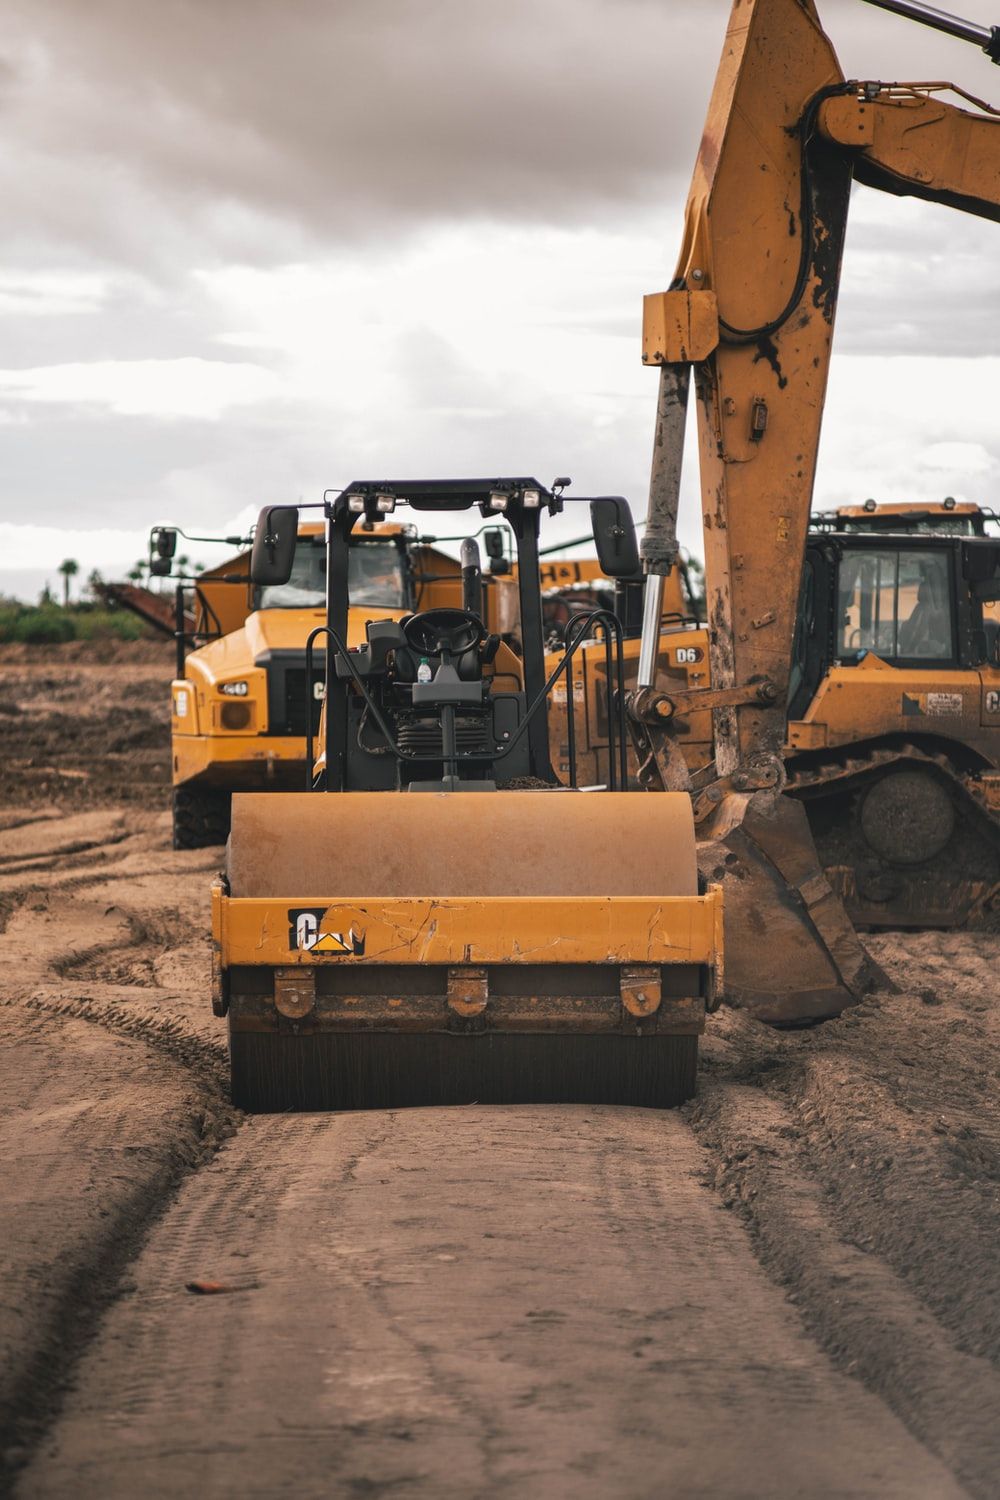 Heavy Equipment Picture. Download Free Image